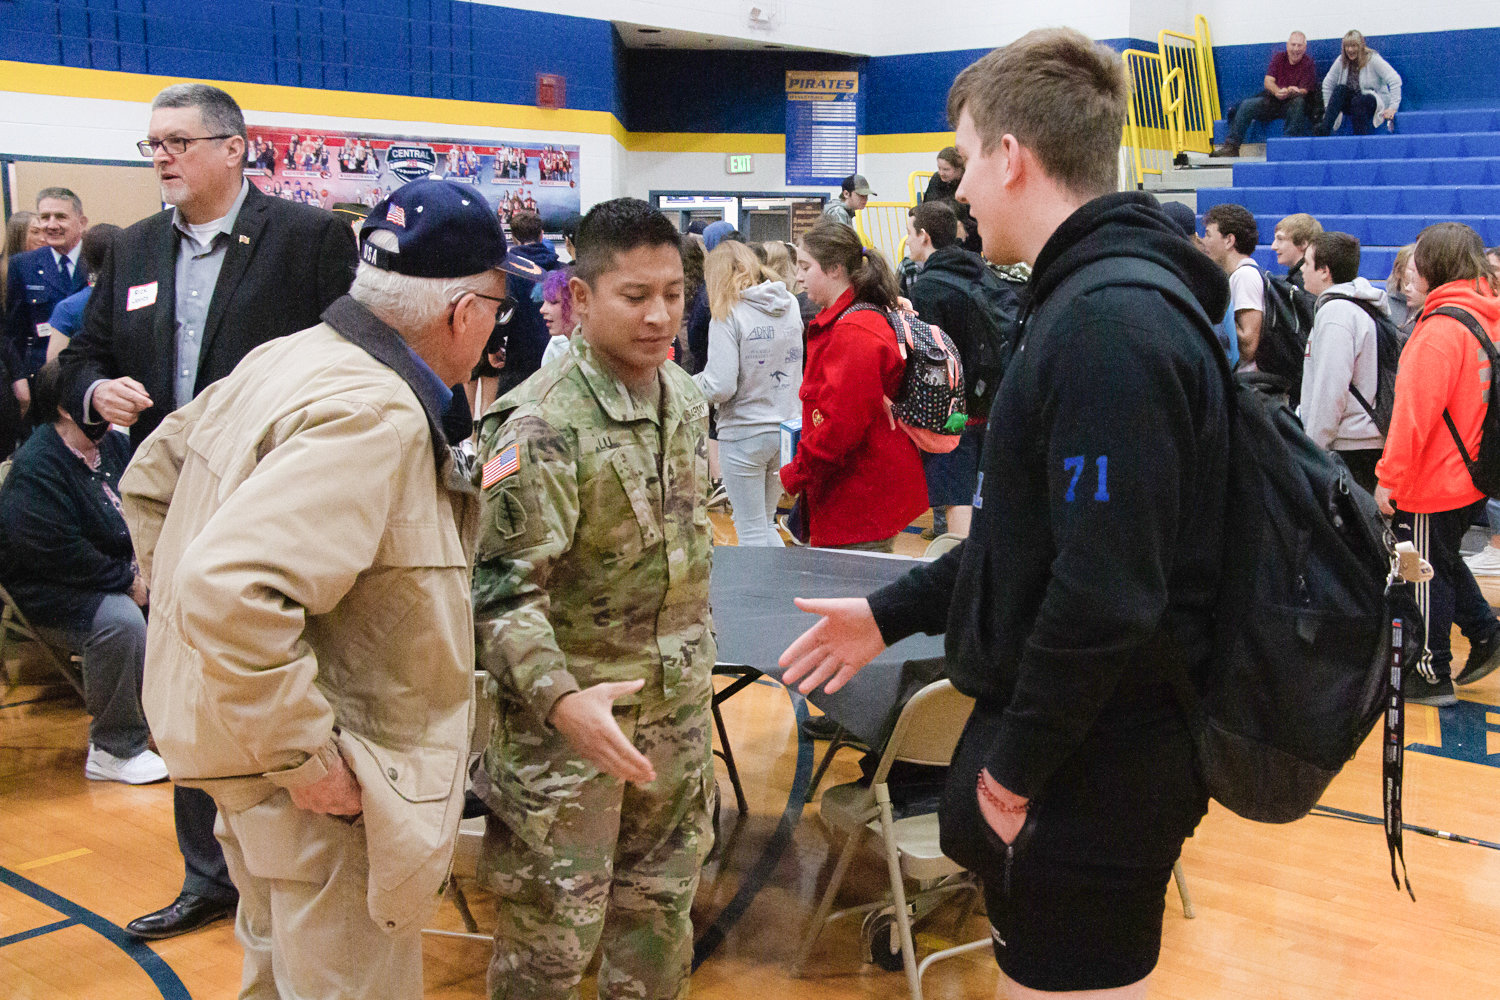 Following his speech at Adna High School's Veterans Day Assembly, Army Master Sergeant and Green Beret Jonathan Lu greeted students before they headed to class.